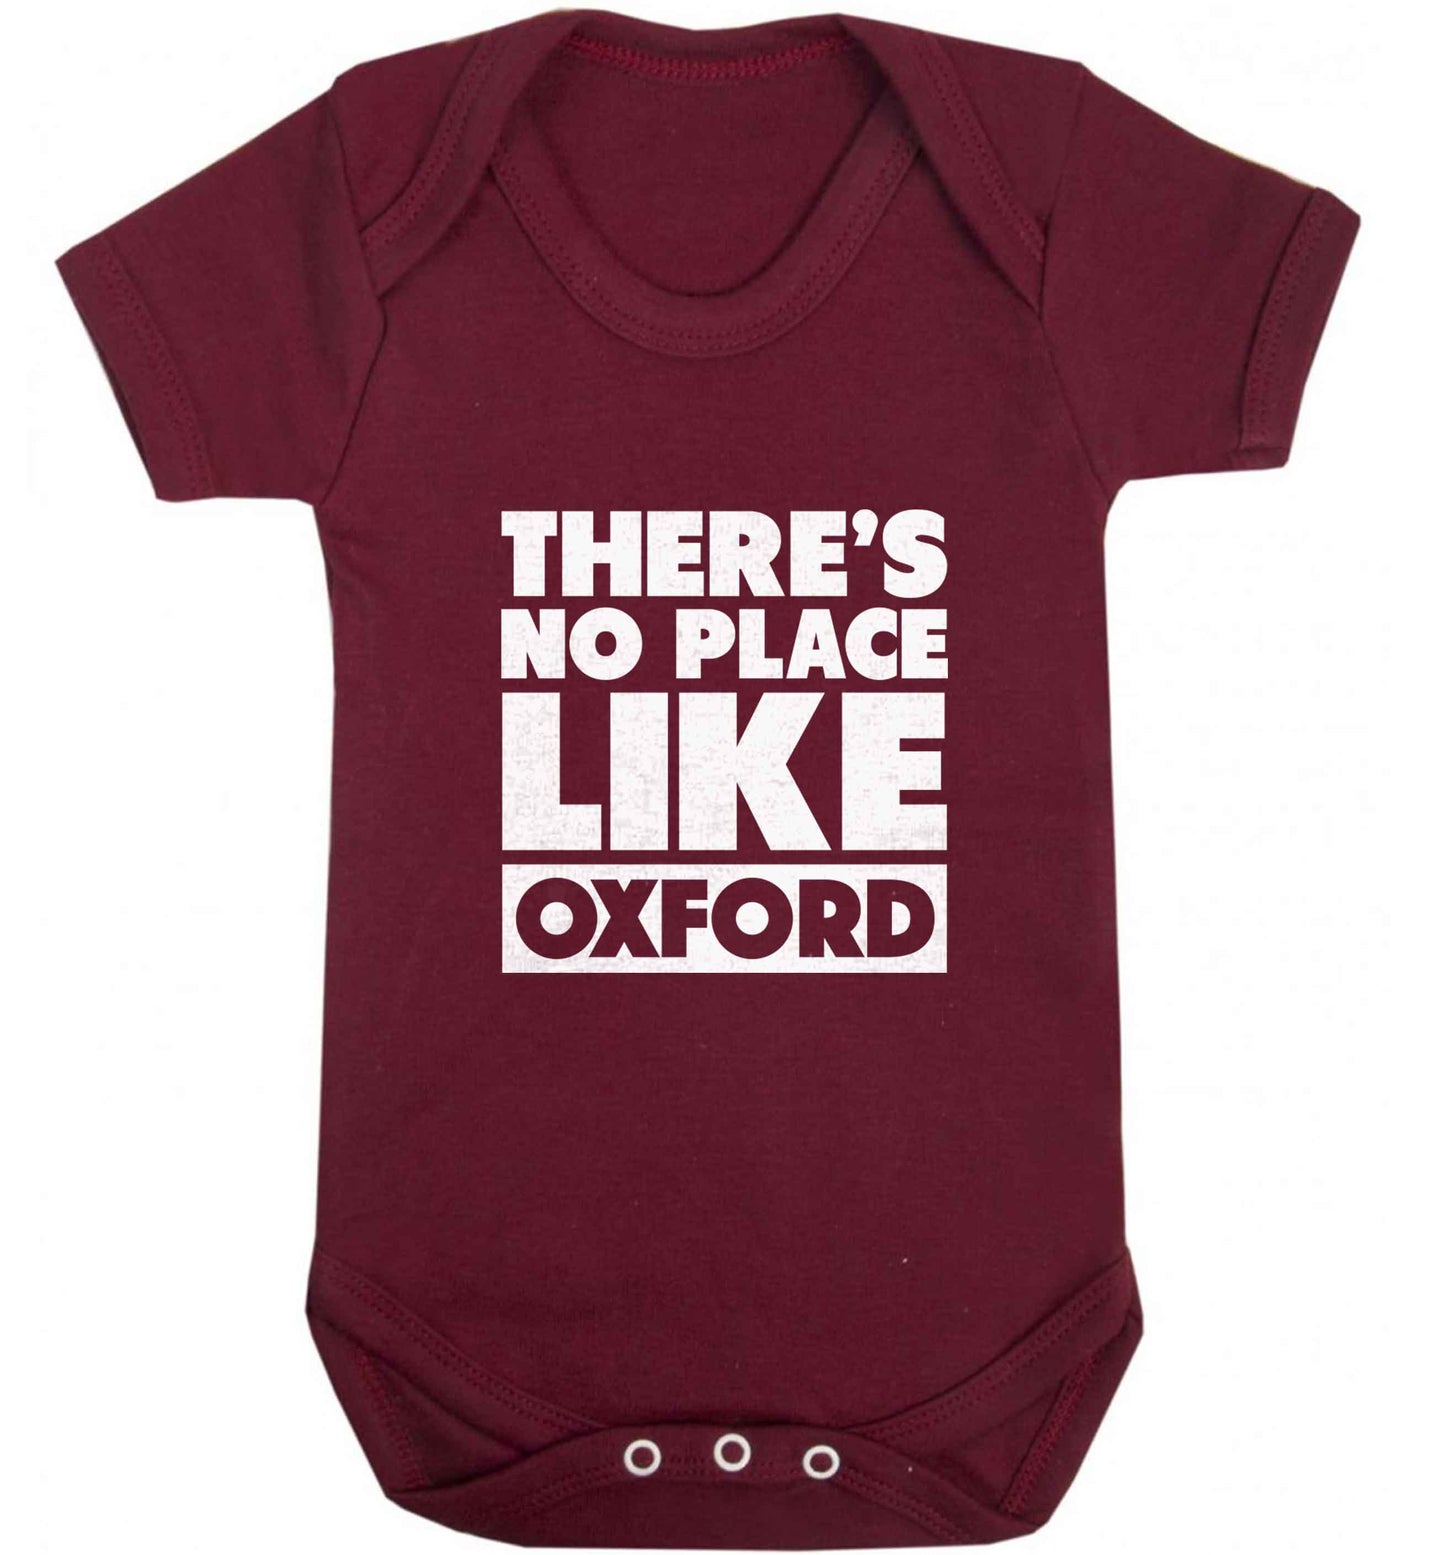 There's no place like Oxford baby vest maroon 18-24 months